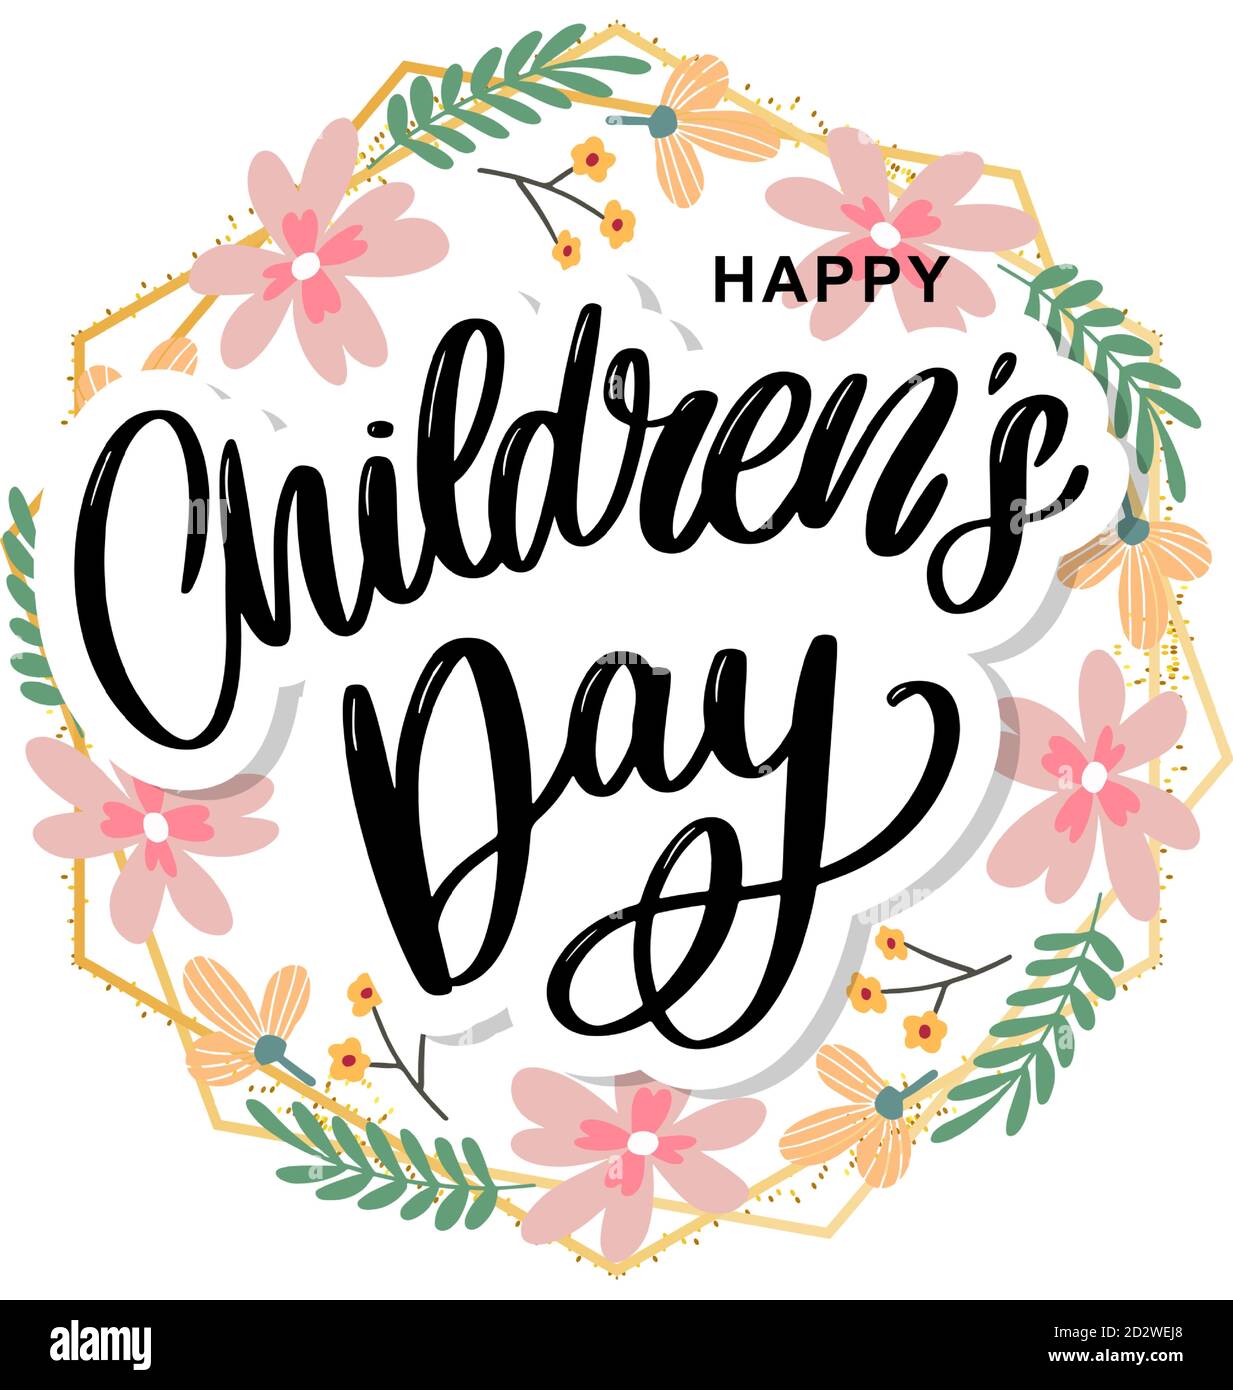 Childrens day Cut Out Stock Images & Pictures - Alamy